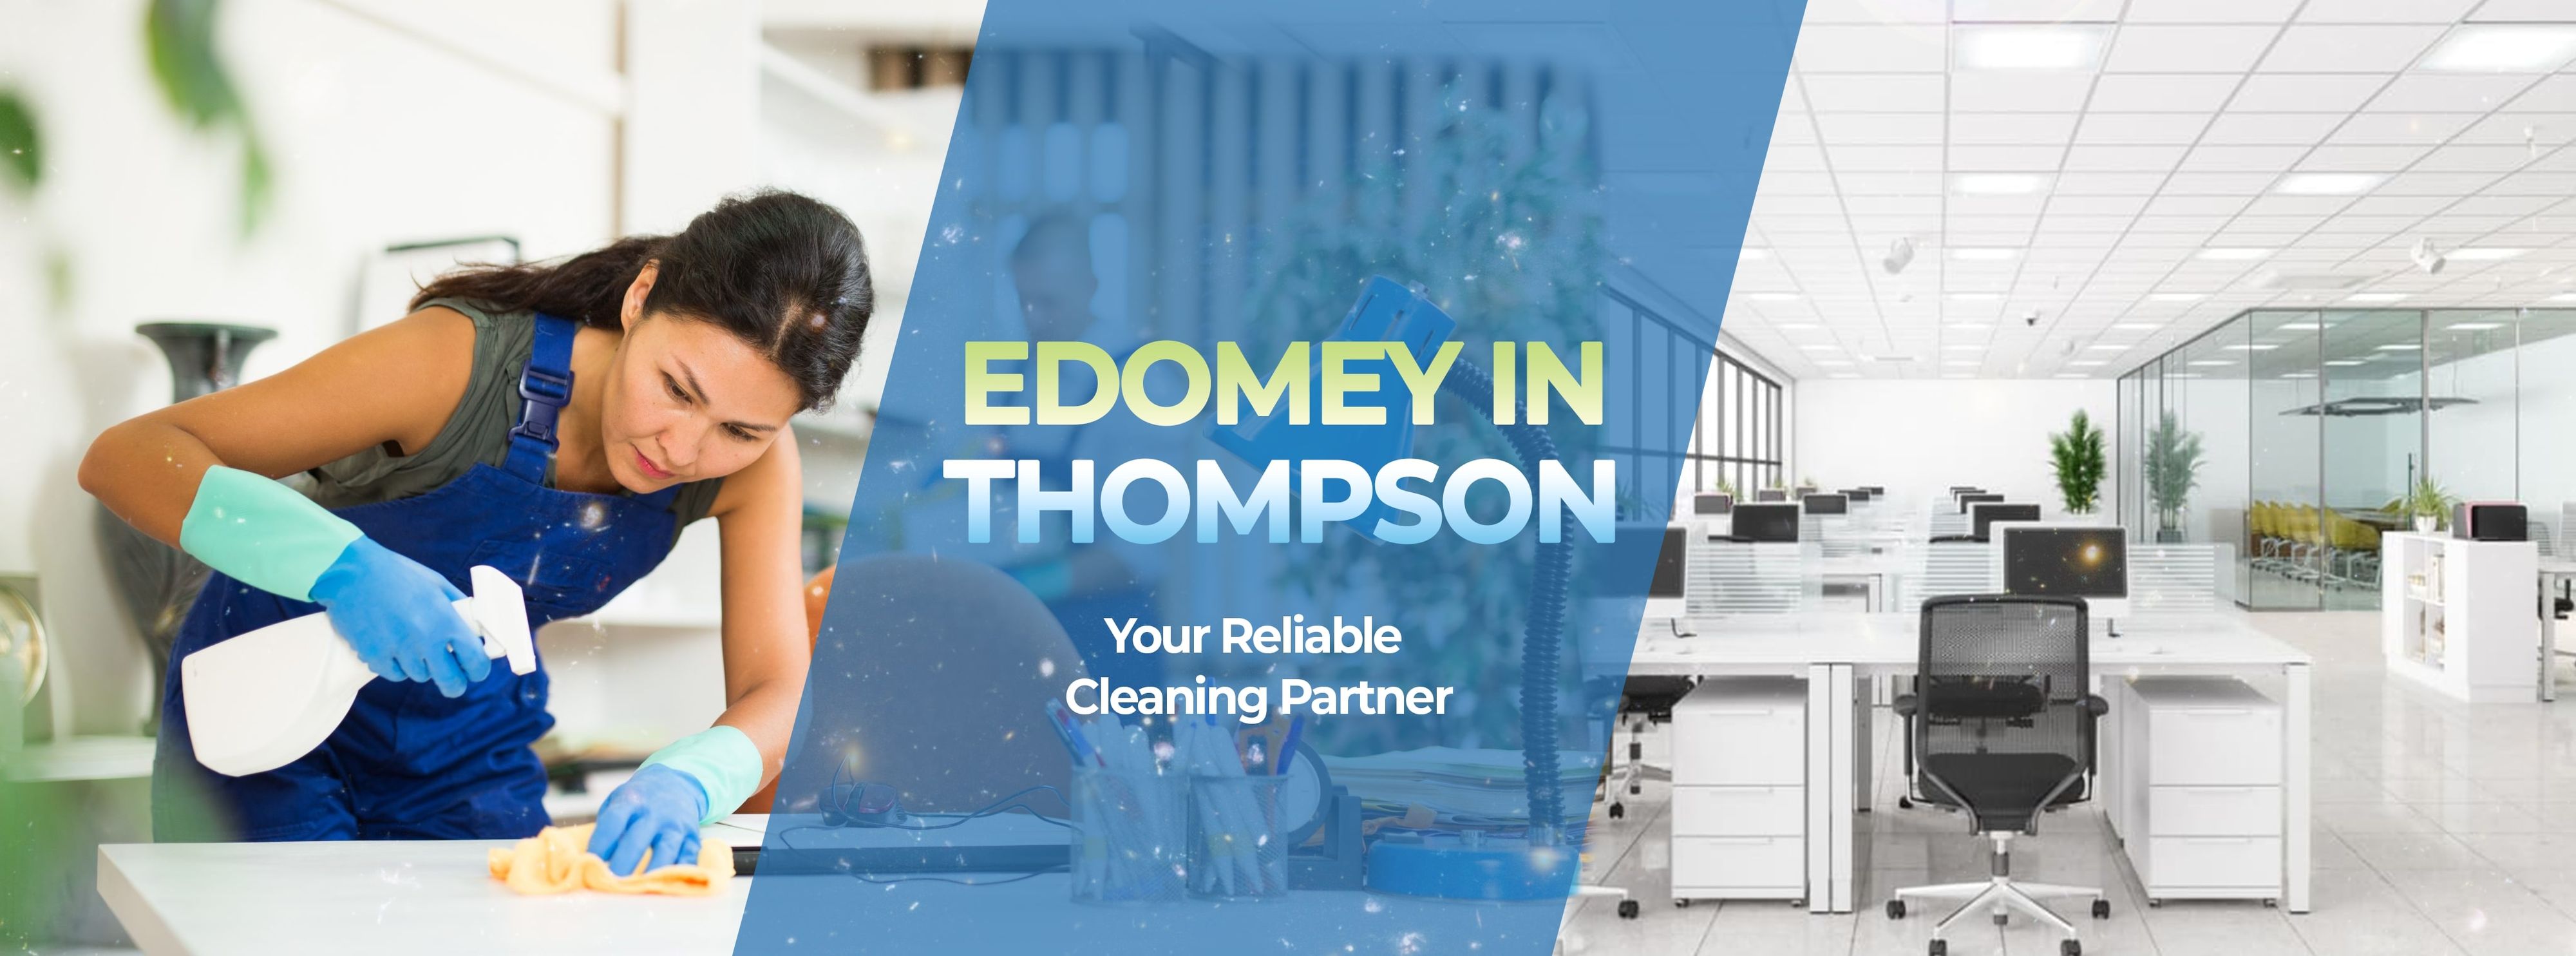 Edomey provides Commercial Cleaning Services in Thompson